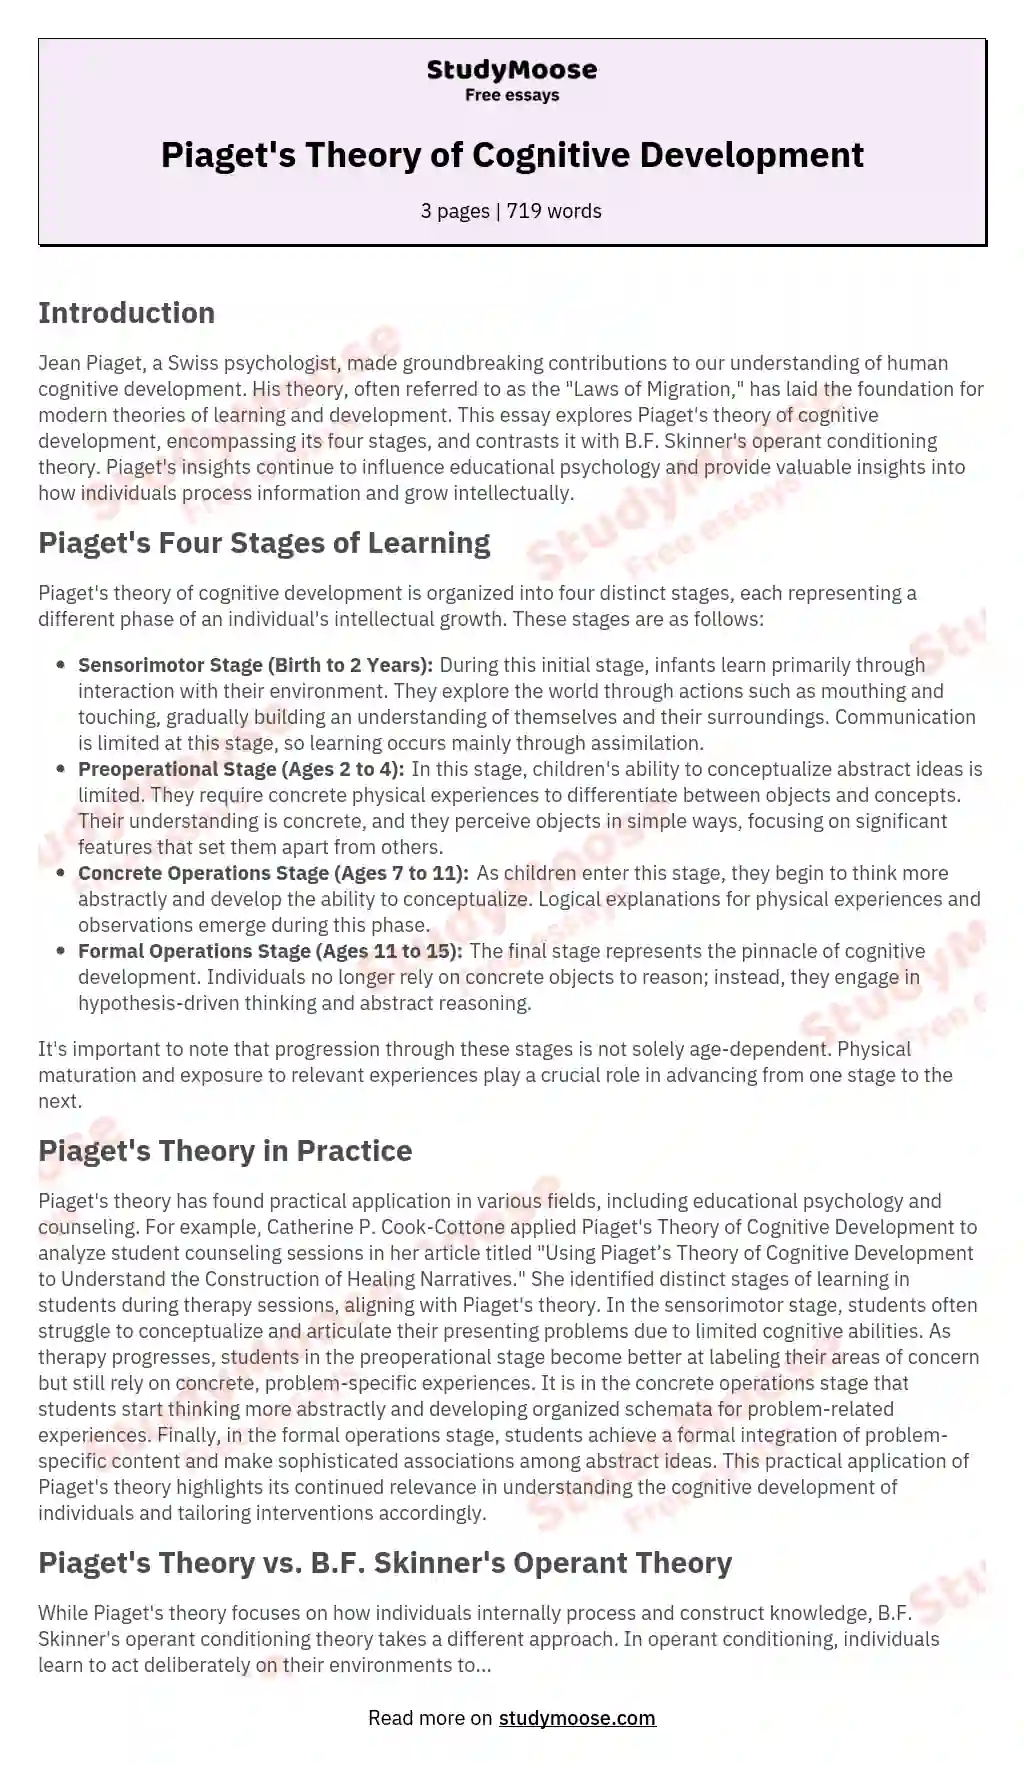 Piaget's Theory of Cognitive Development essay